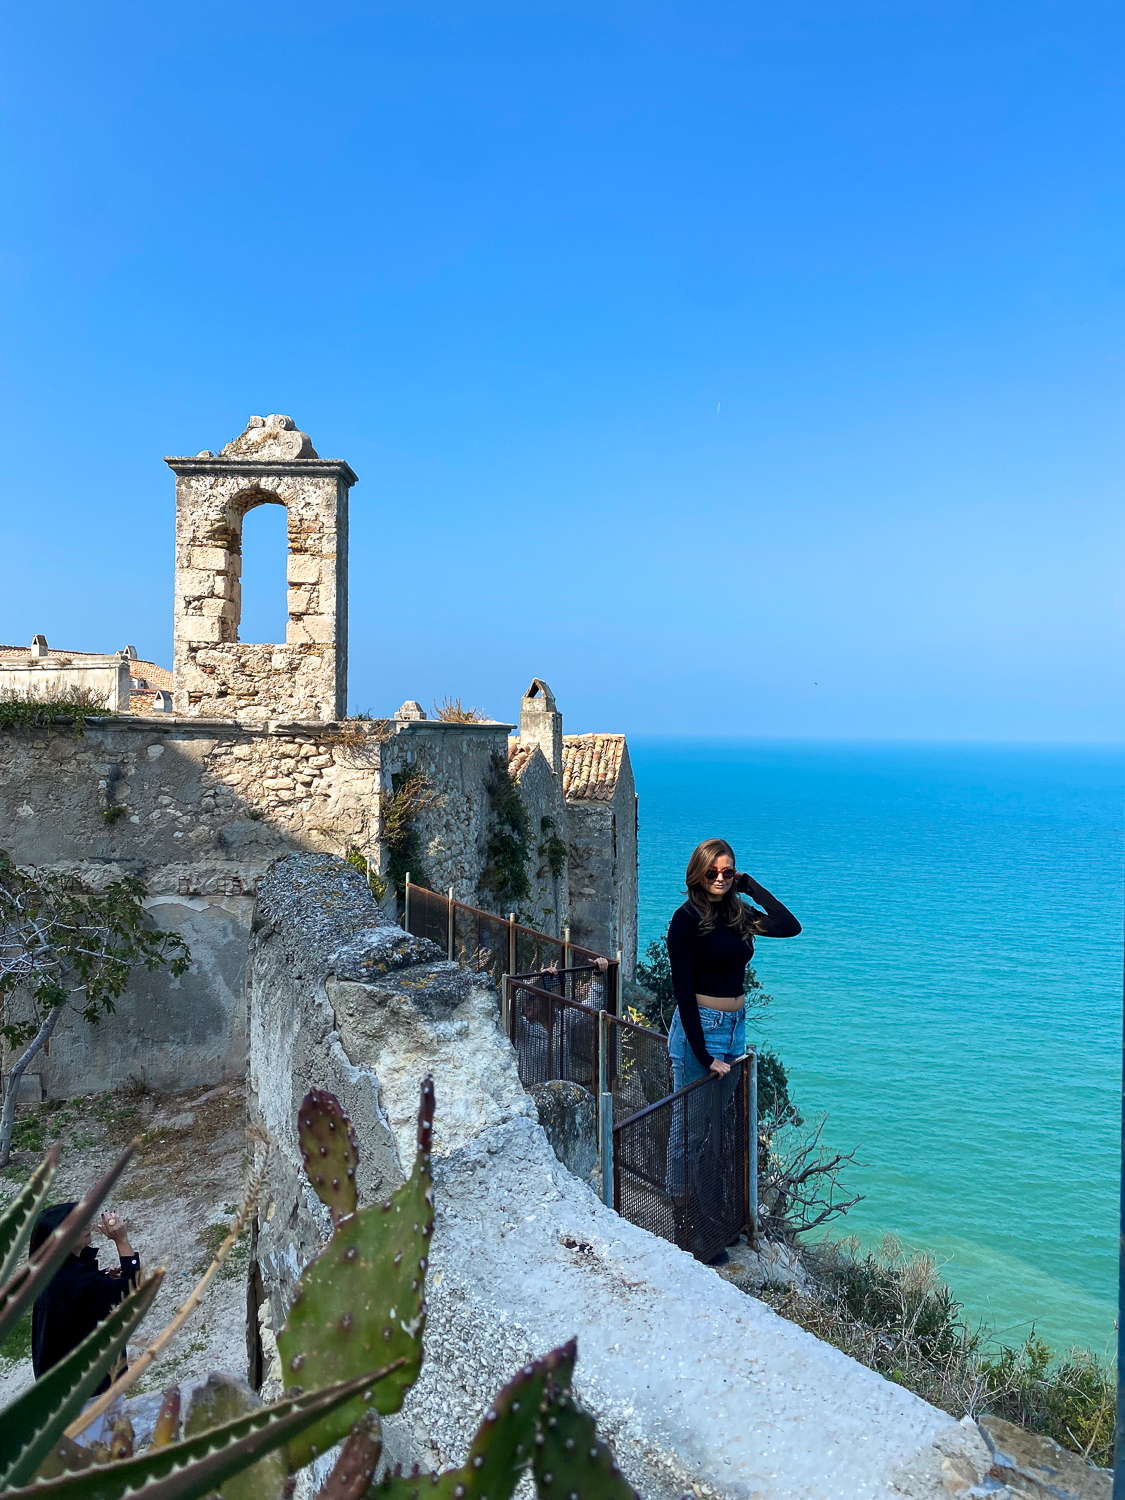 Melanie standing on a viewpoint by the sea in Peschici - a must-add in your Puglia road trip itinerary